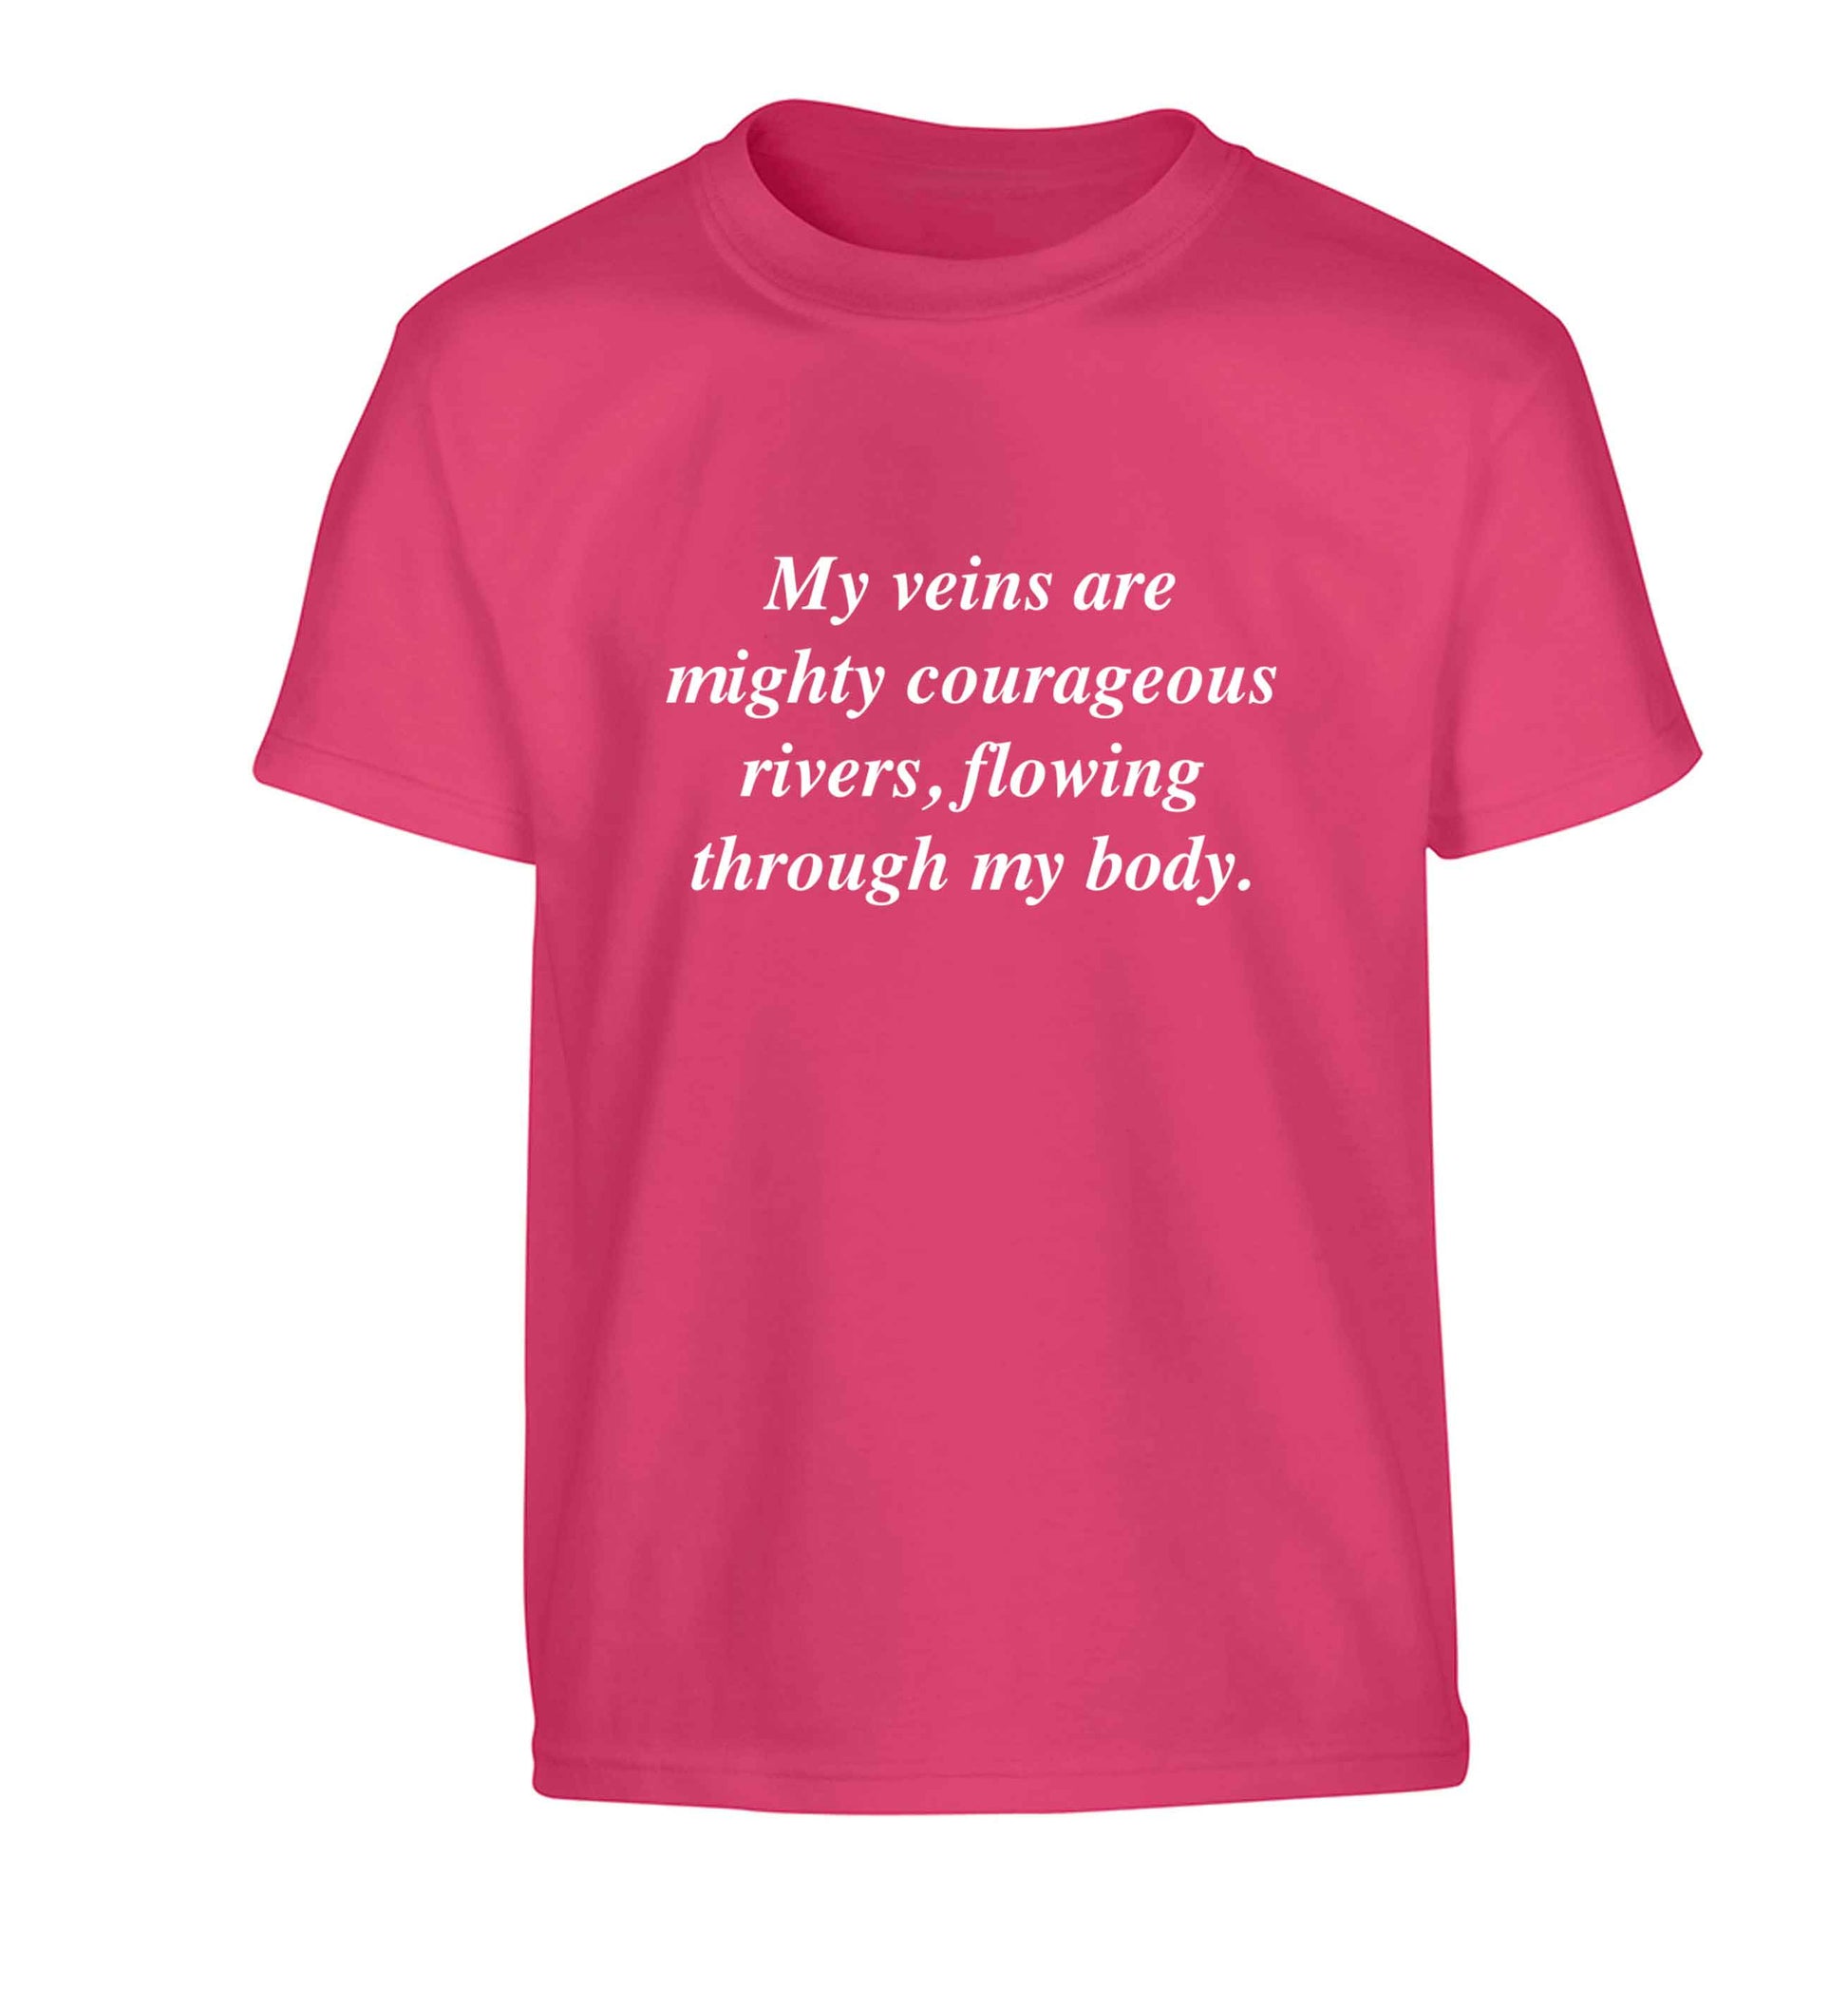 My veins are mighty courageous rivers, flowing through my body Children's pink Tshirt 12-13 Years